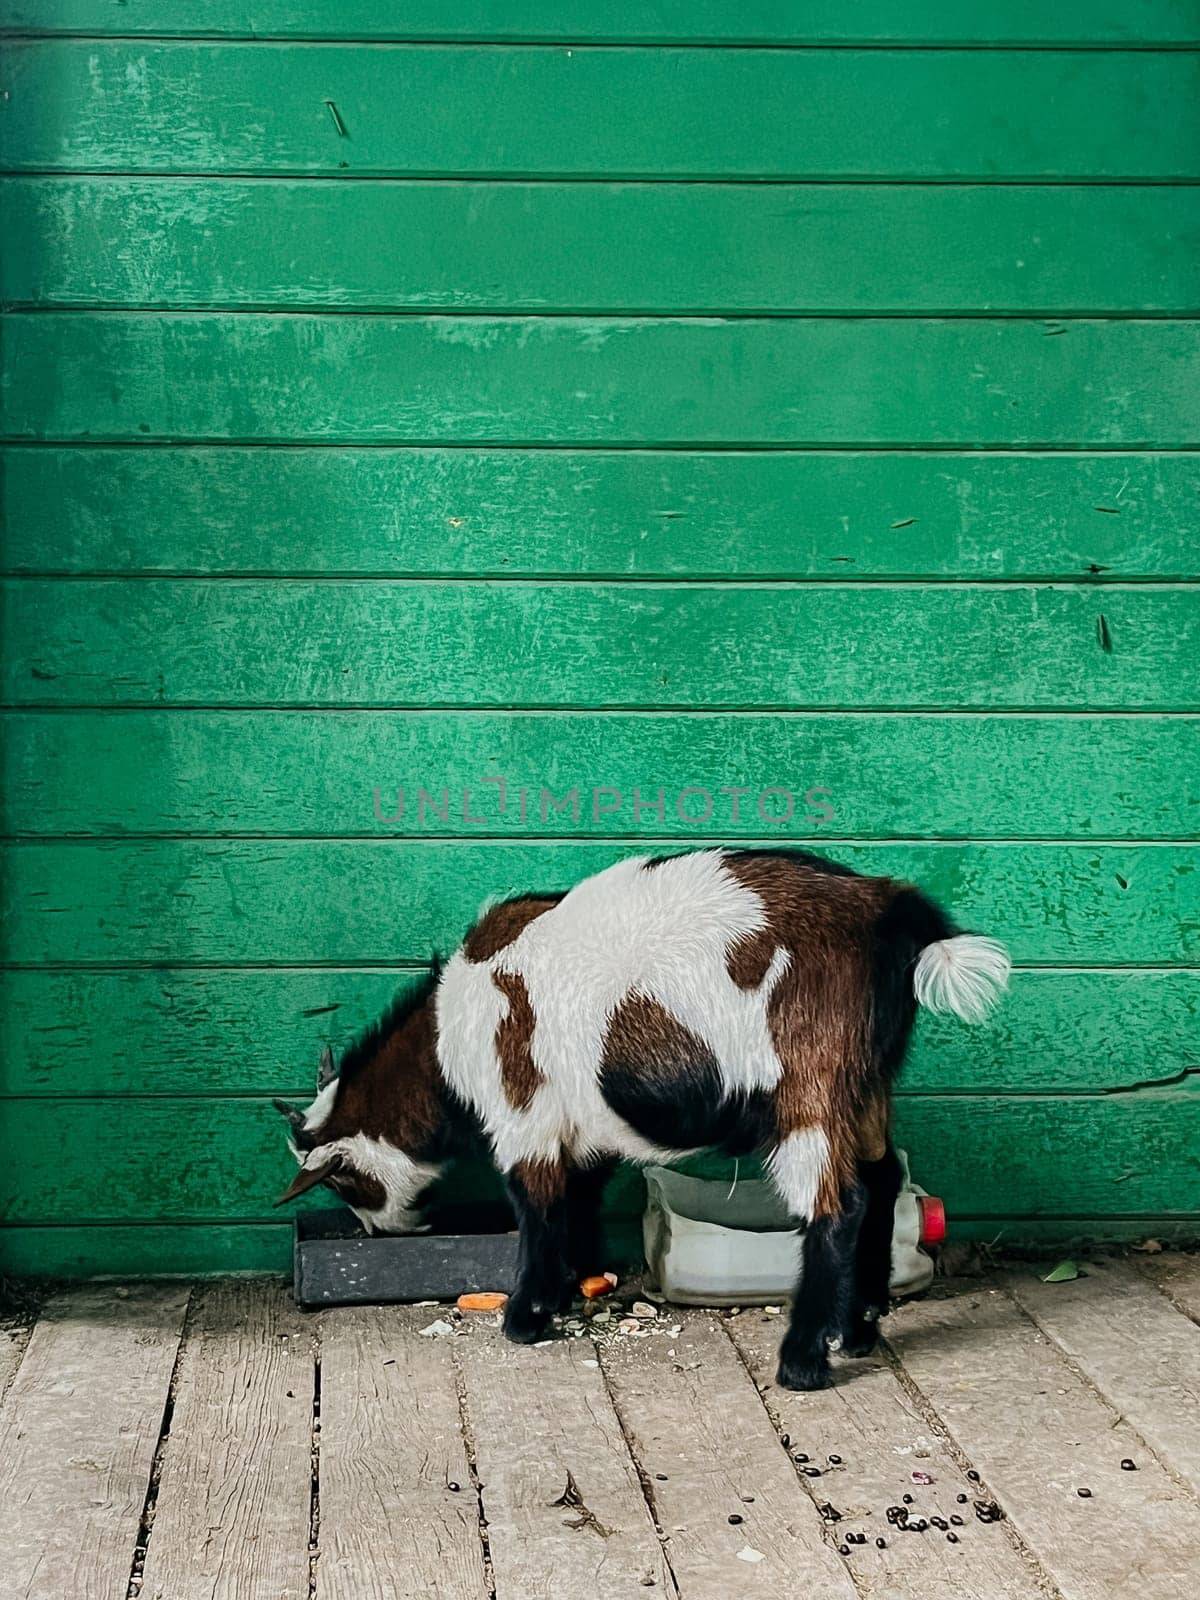 A small goat with brown and white fur stands sideways eating food scattered on the wooden floor in front of a solid green wall.